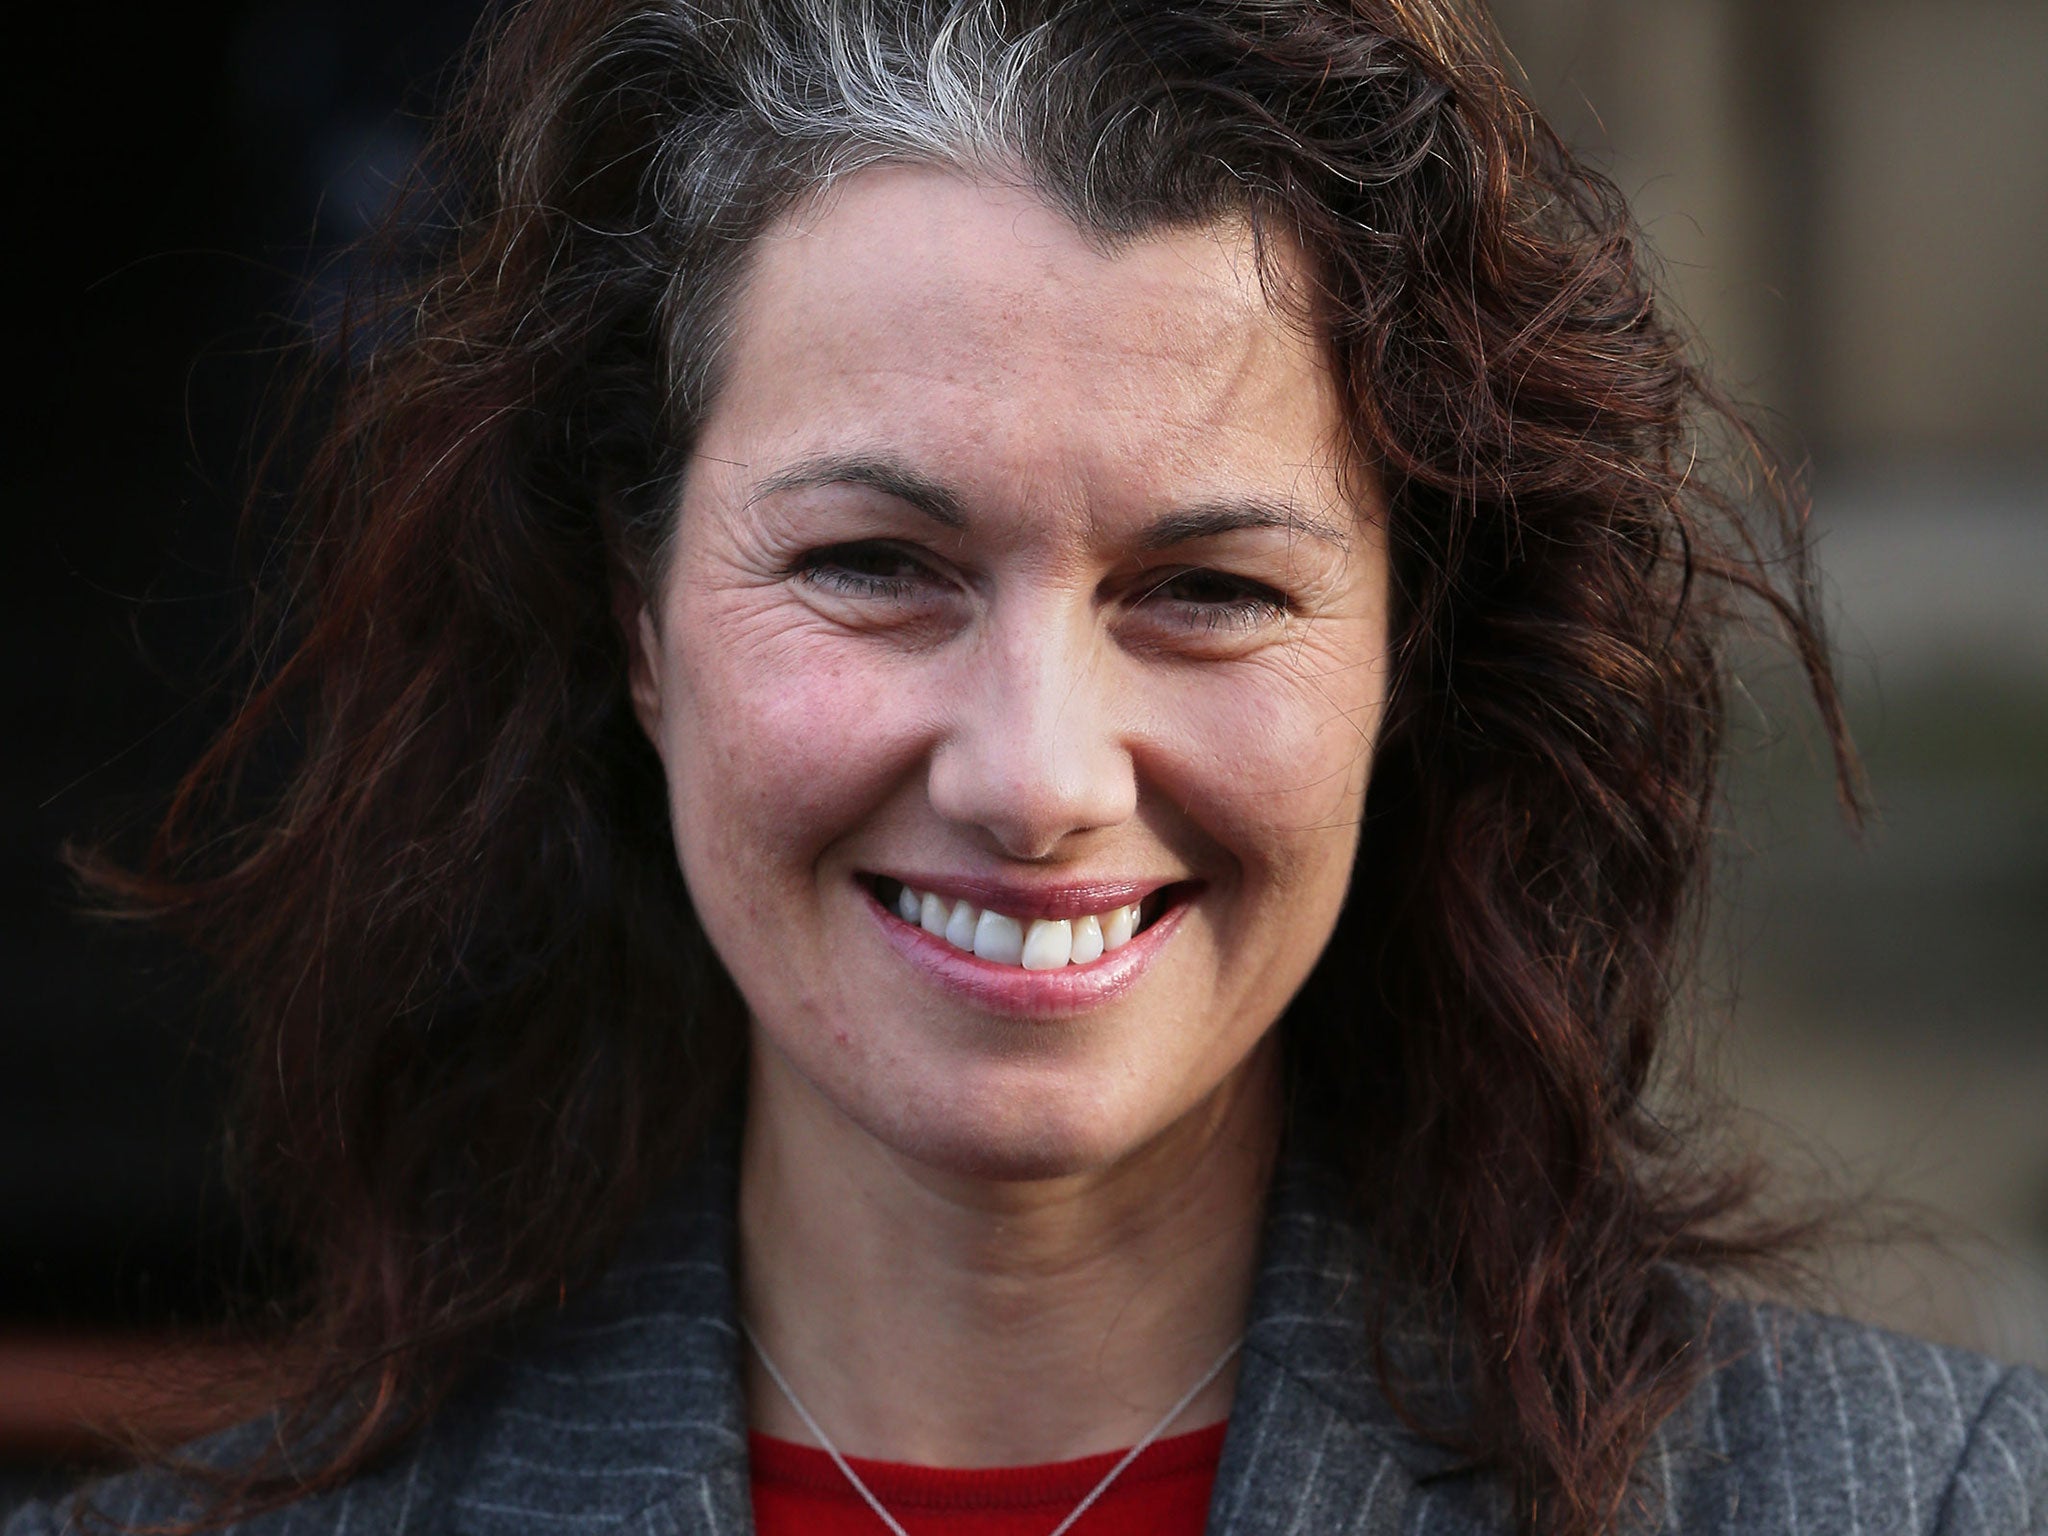 Sarah Champion, the new shadow minister for preventing abuse